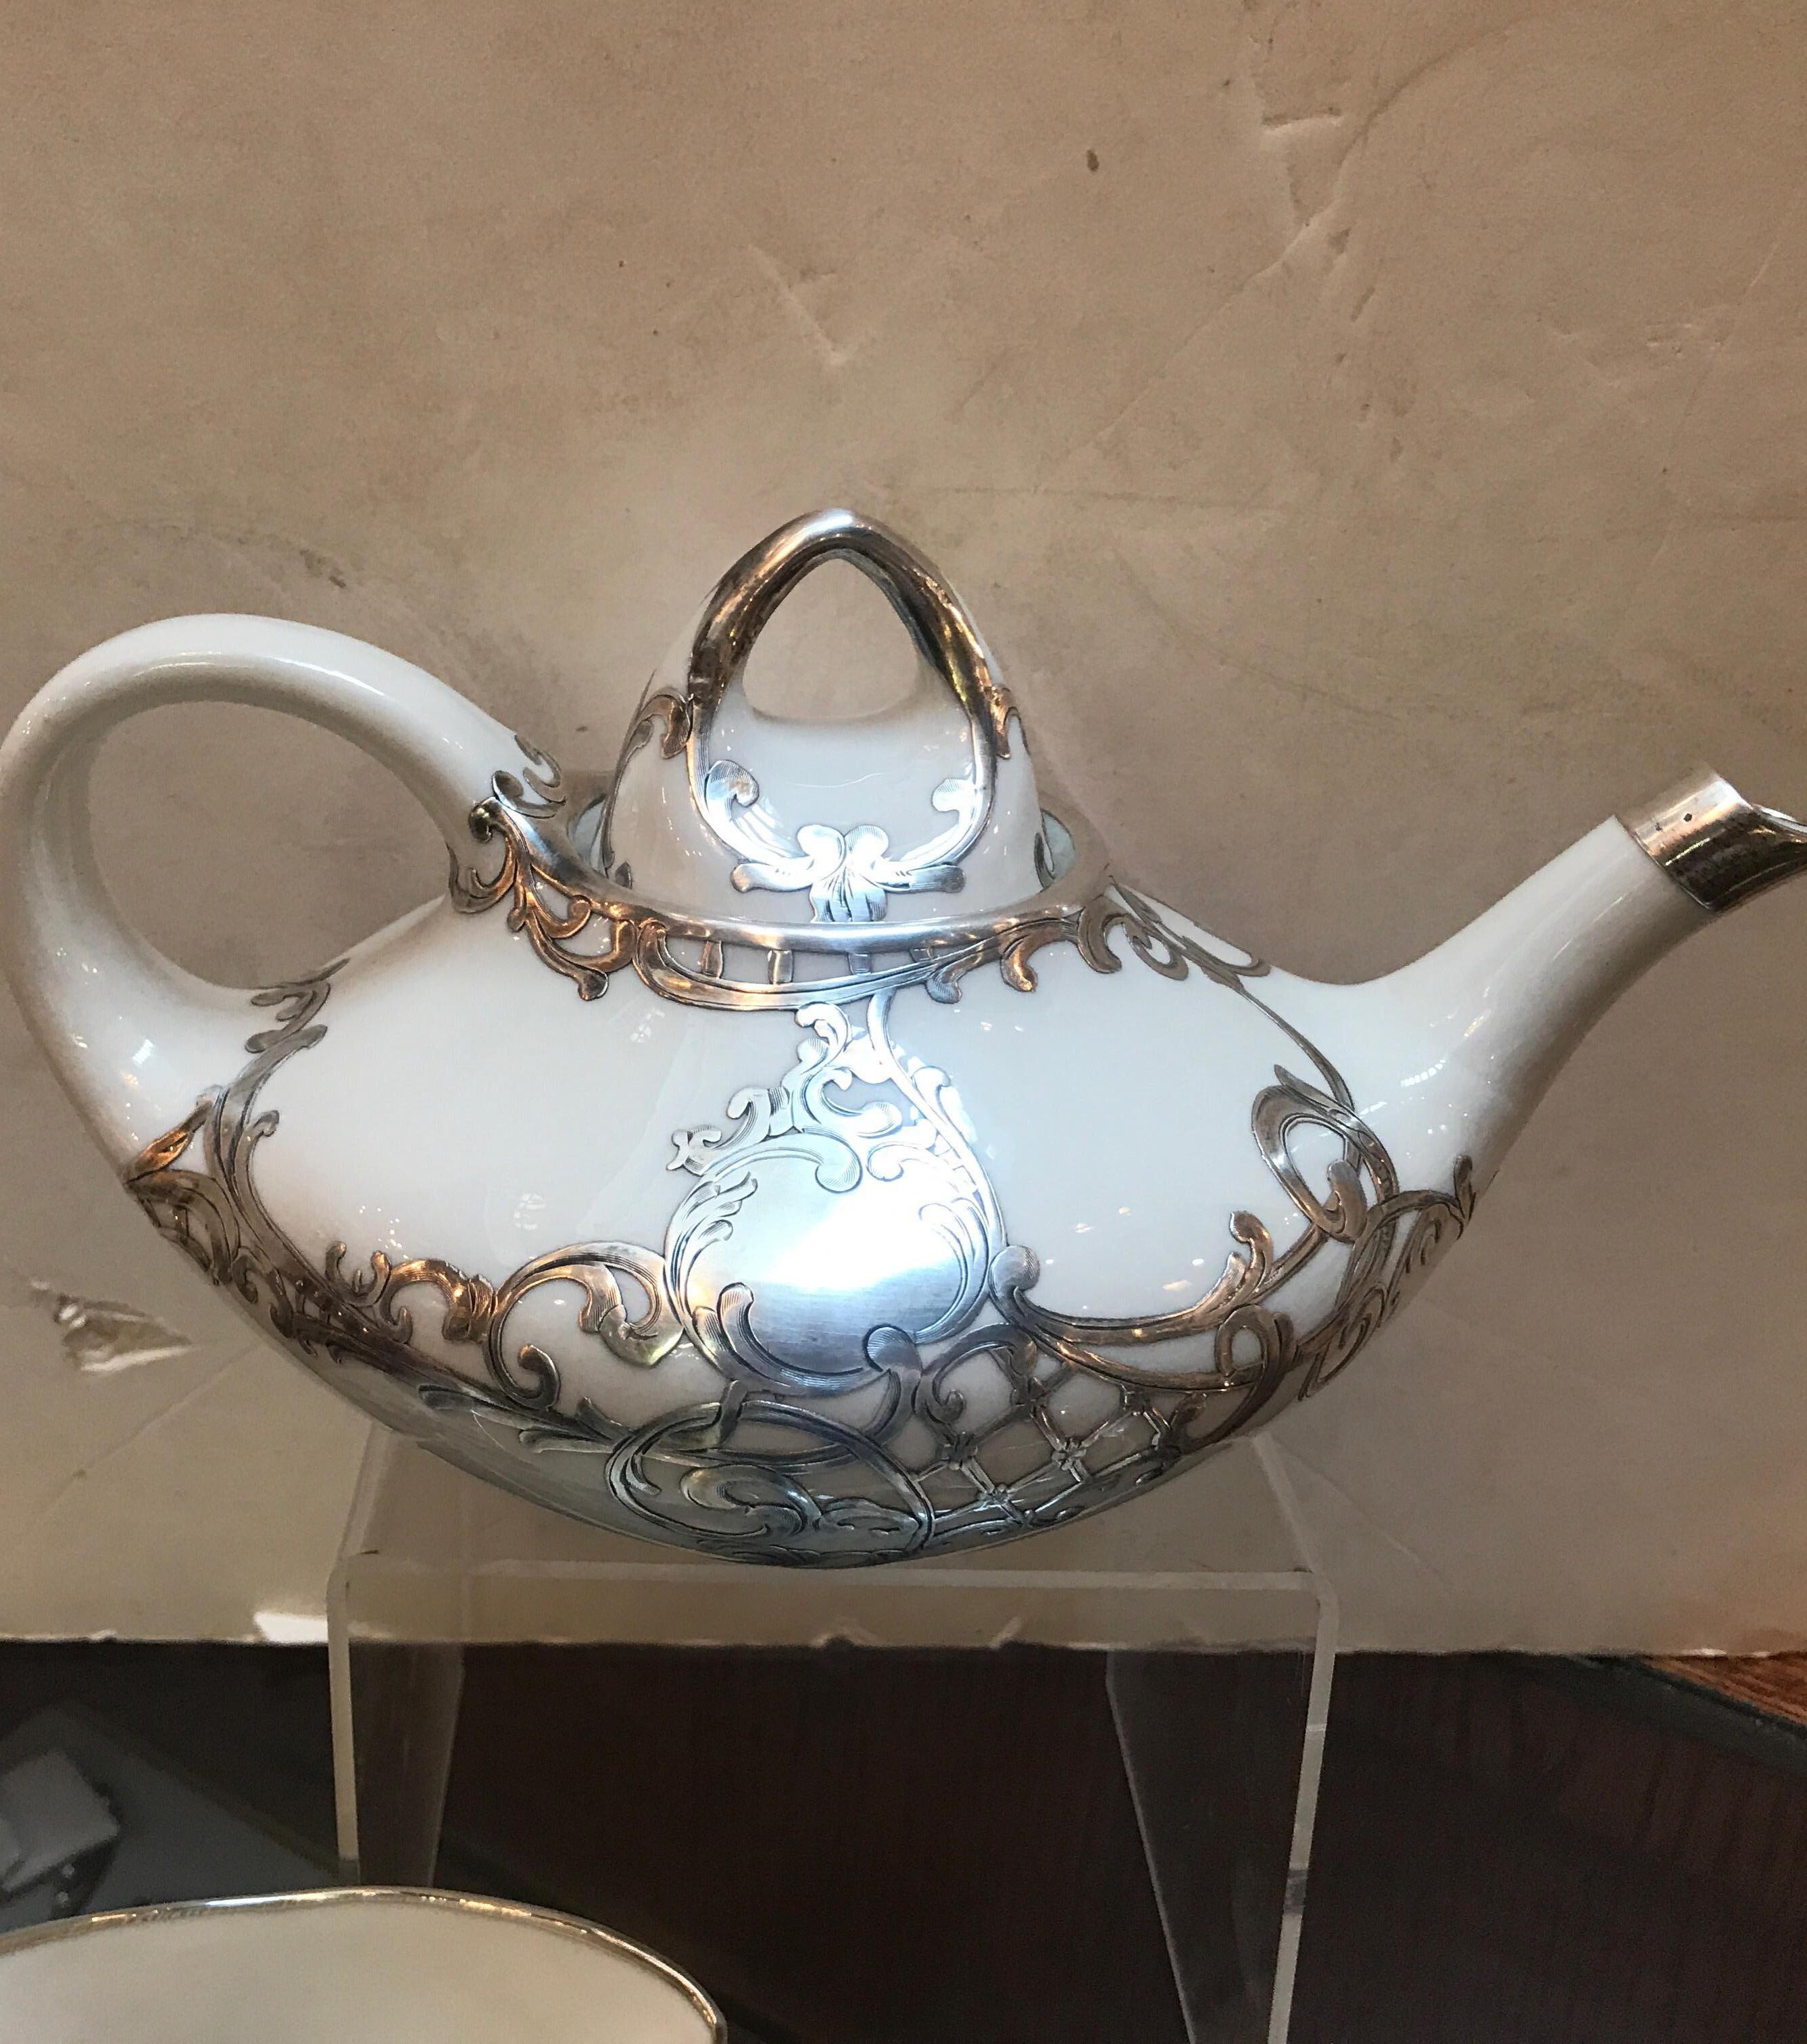 Beautiful 3-piece tea set with sterling silver overlay. The solid silver fused to the off white porcelain in excellent condition, The Aladdin shaped tea pot with an Art Nouveau style silver pattern overlay,
circa 1915-1920.